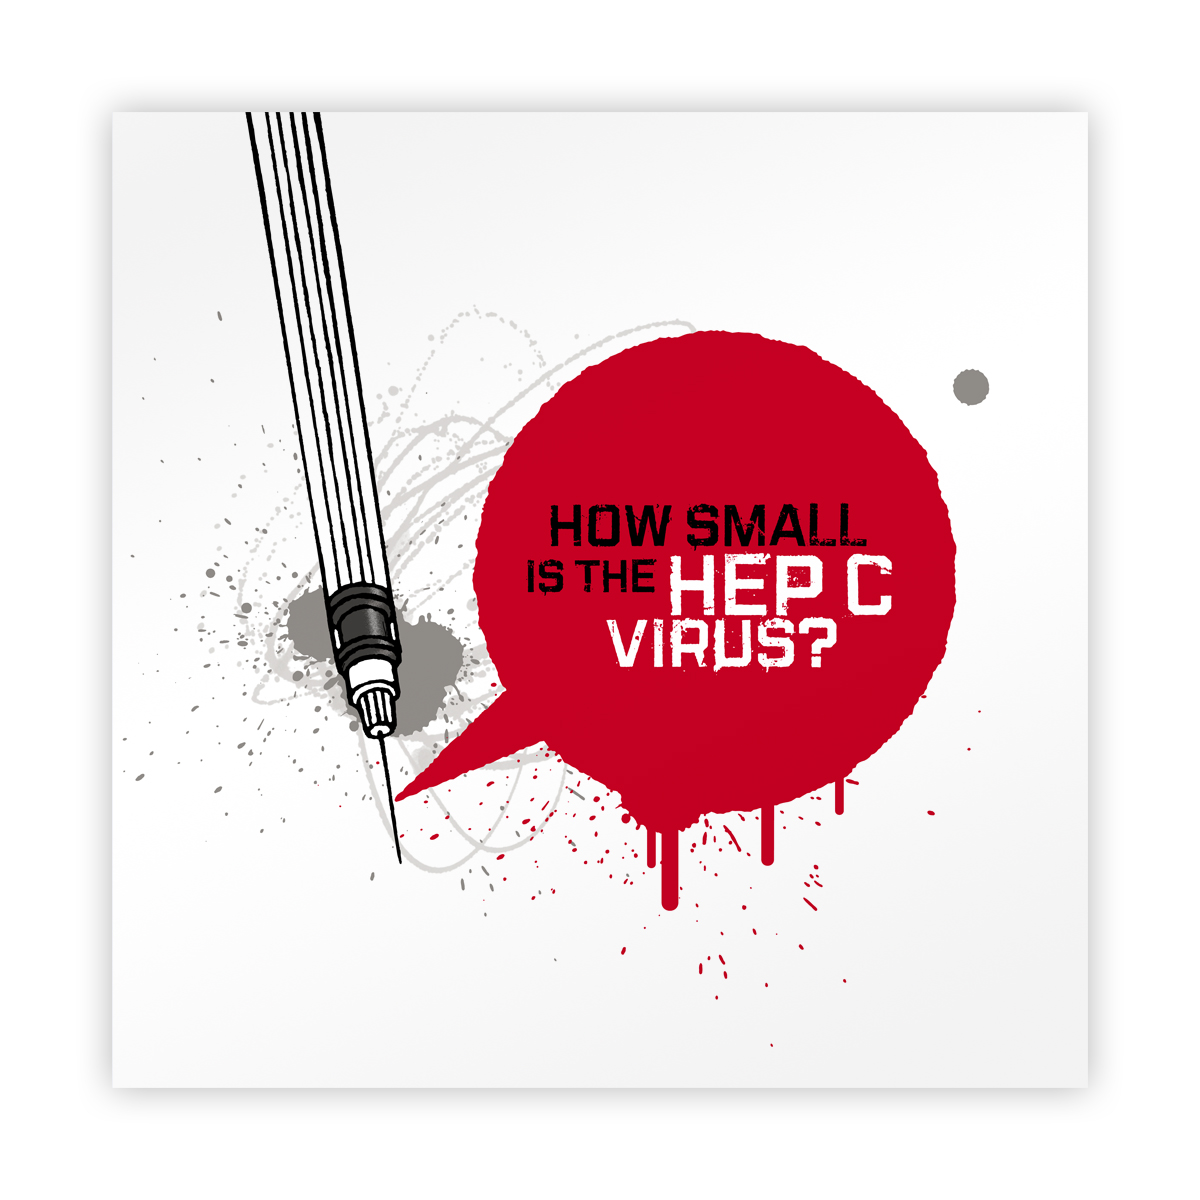 How small is the hep C virus? – leaflet